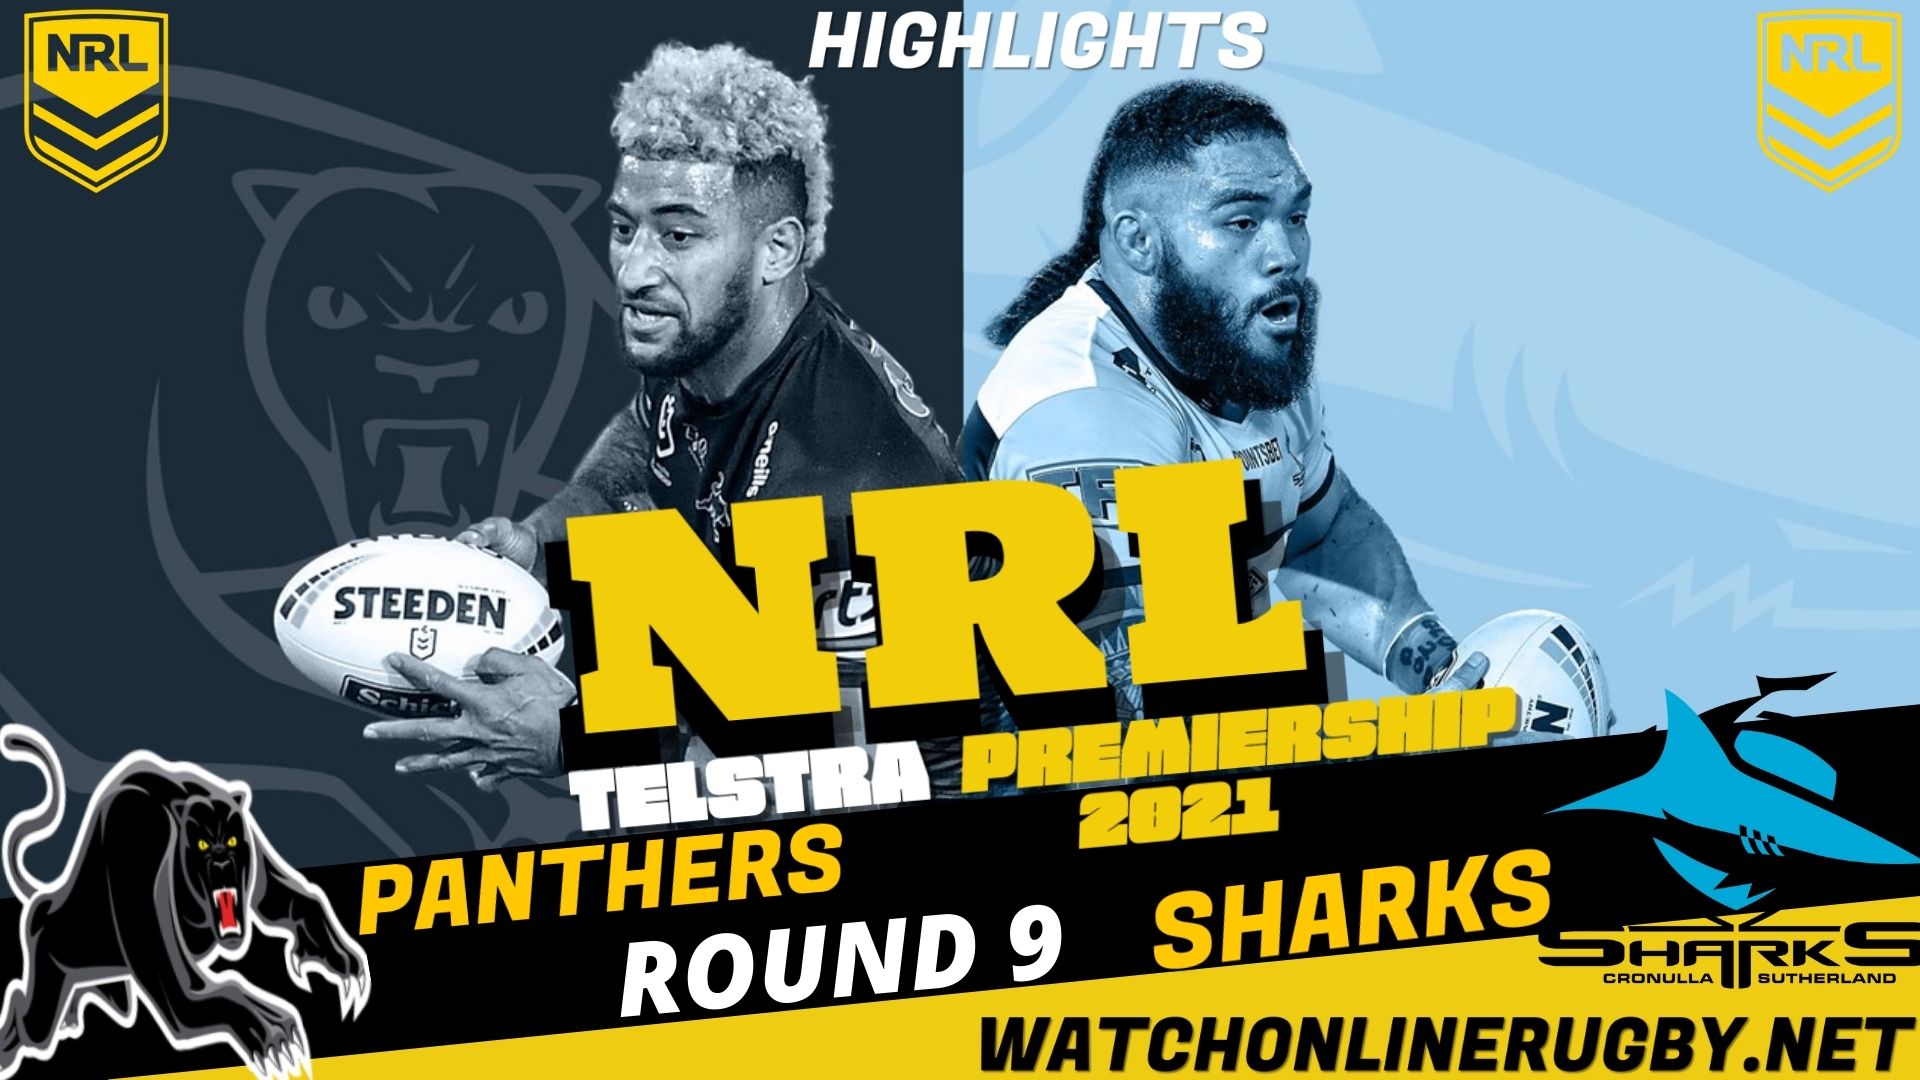 Panthers Vs Sharks Highlights RD 9 NRL Rugby